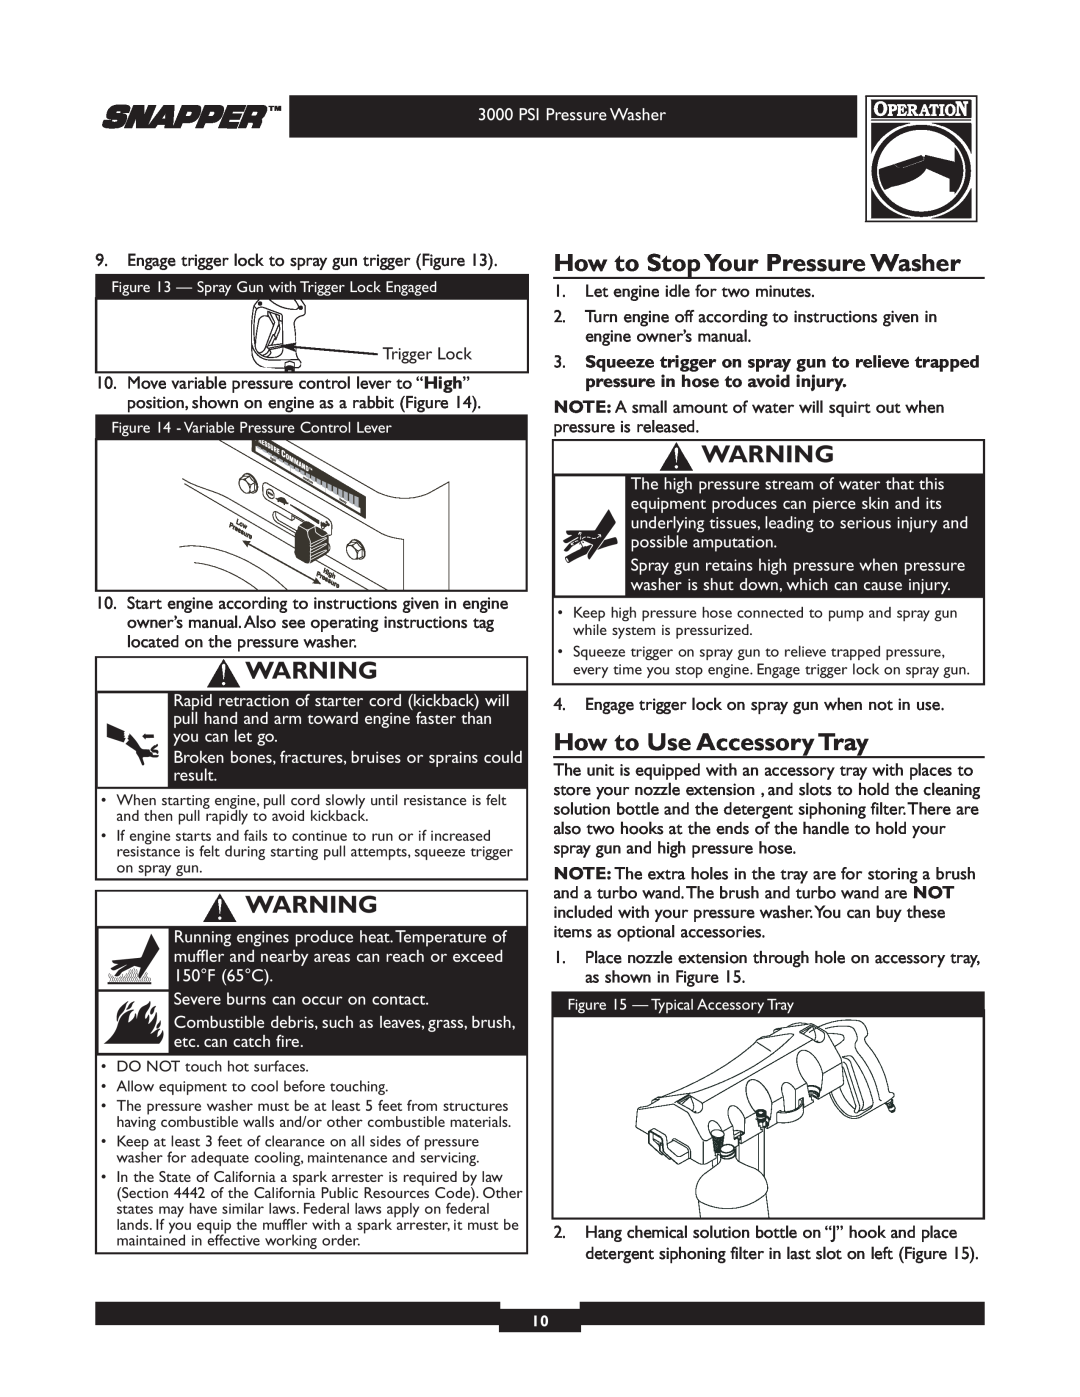 Snapper 020231 owner manual How to Stop Your Pressure Washer, How to Use Accessory Tray, PSI Pressure Washer 